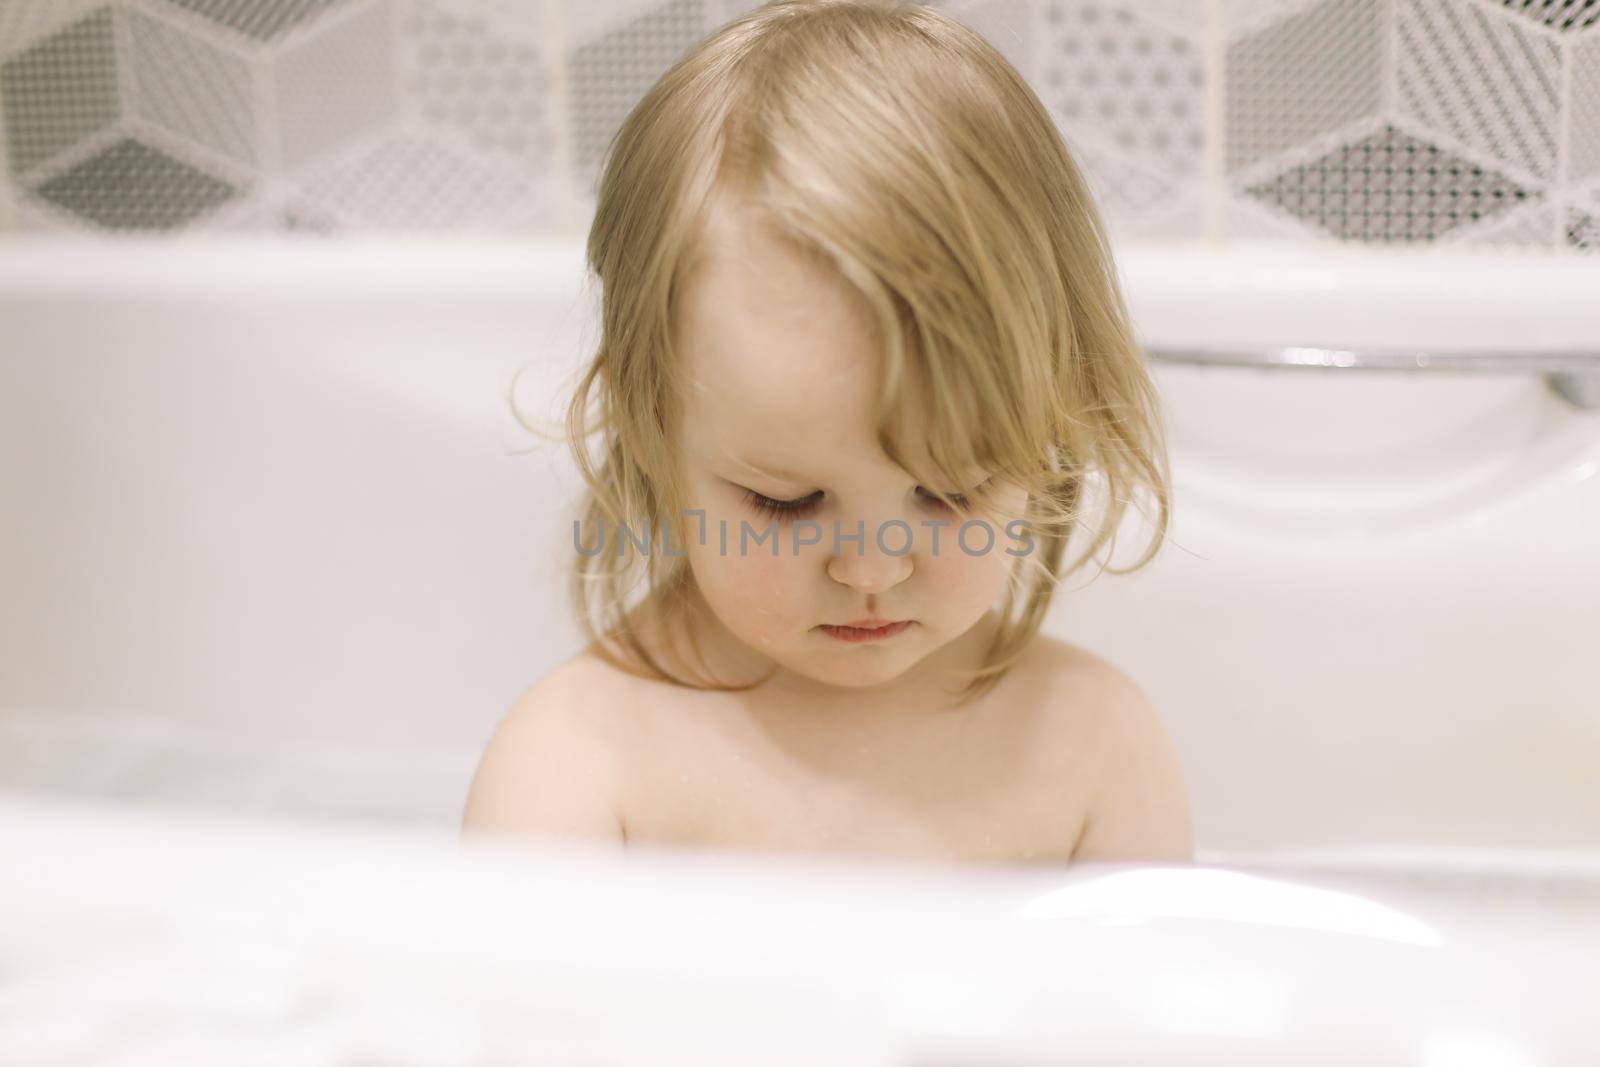 Child bathing. Little baby taking bath, closeup face portrait of smiling girl, health care and kids hygiene. 